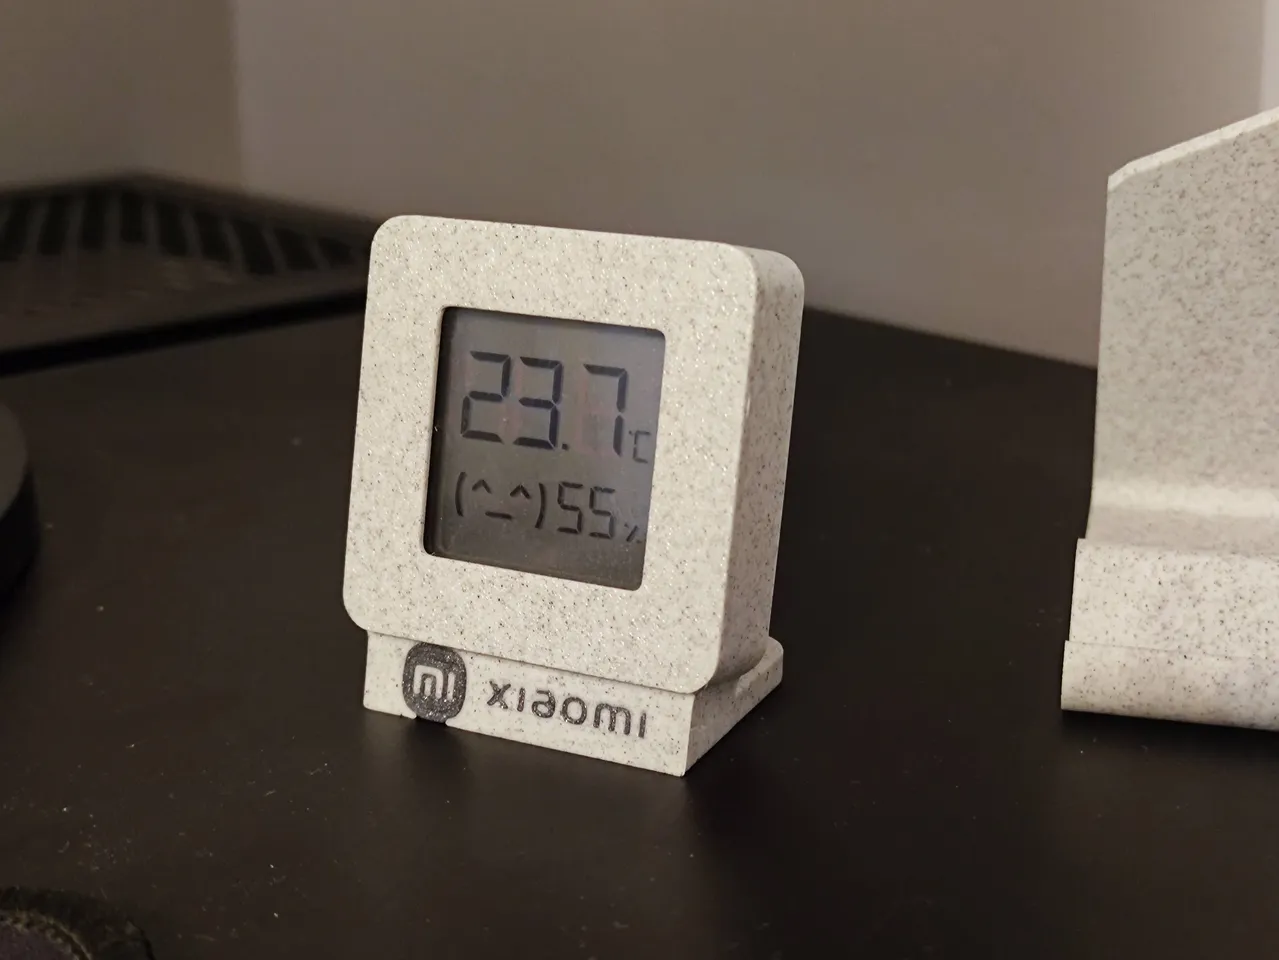 Xiaomi Mi Temperature and Humidity Monitor Stand by Robs